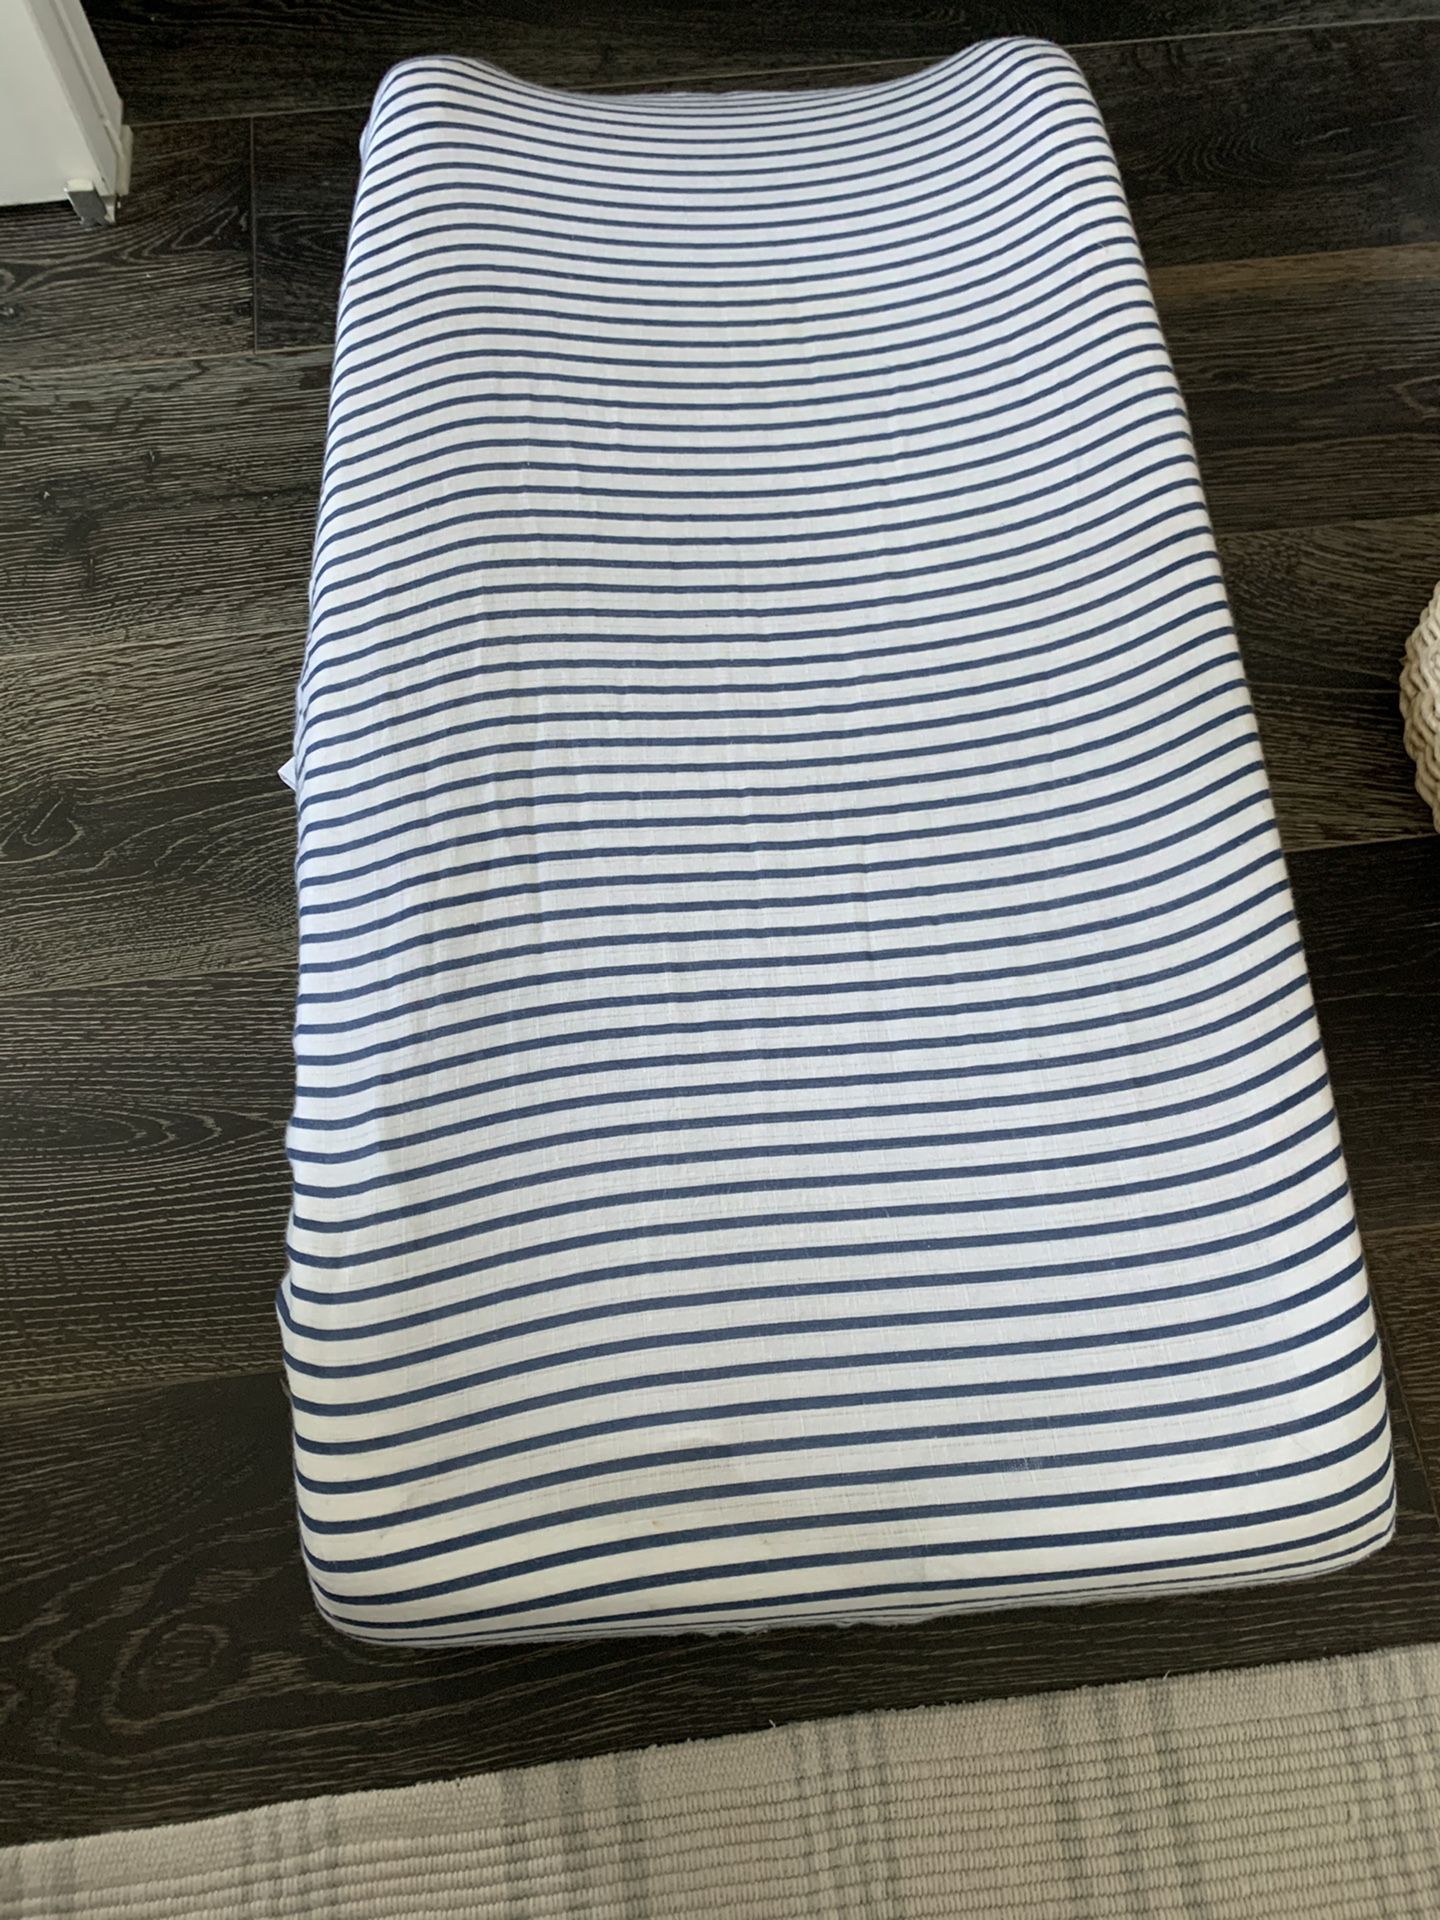 Changing table pad and cover